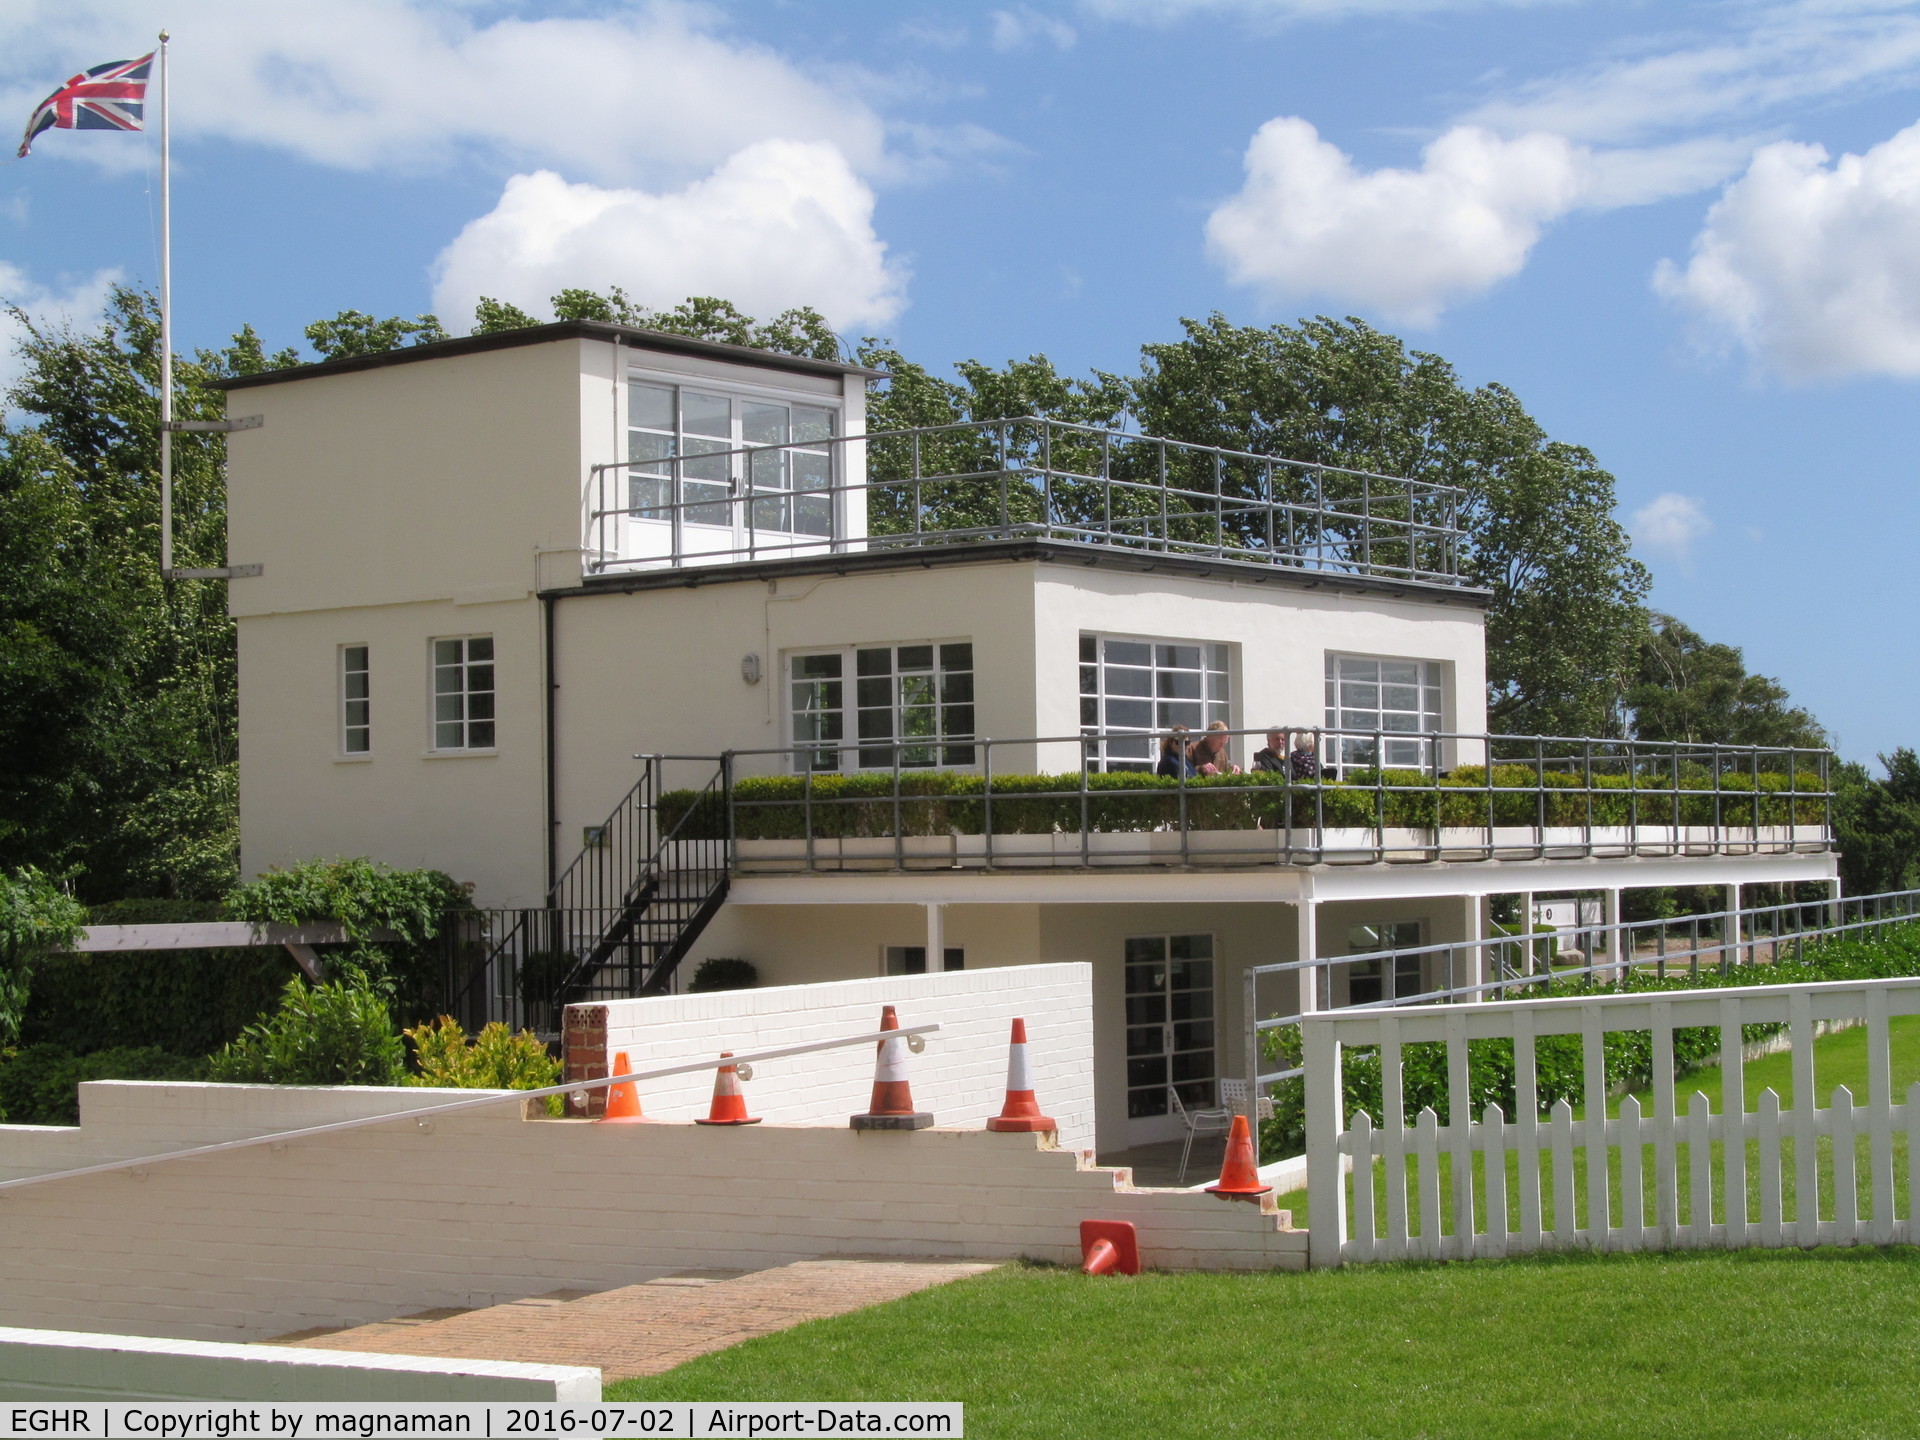 Goodwood Airfield Airport, Chichester, England United Kingdom (EGHR) - old control tower - now cafe